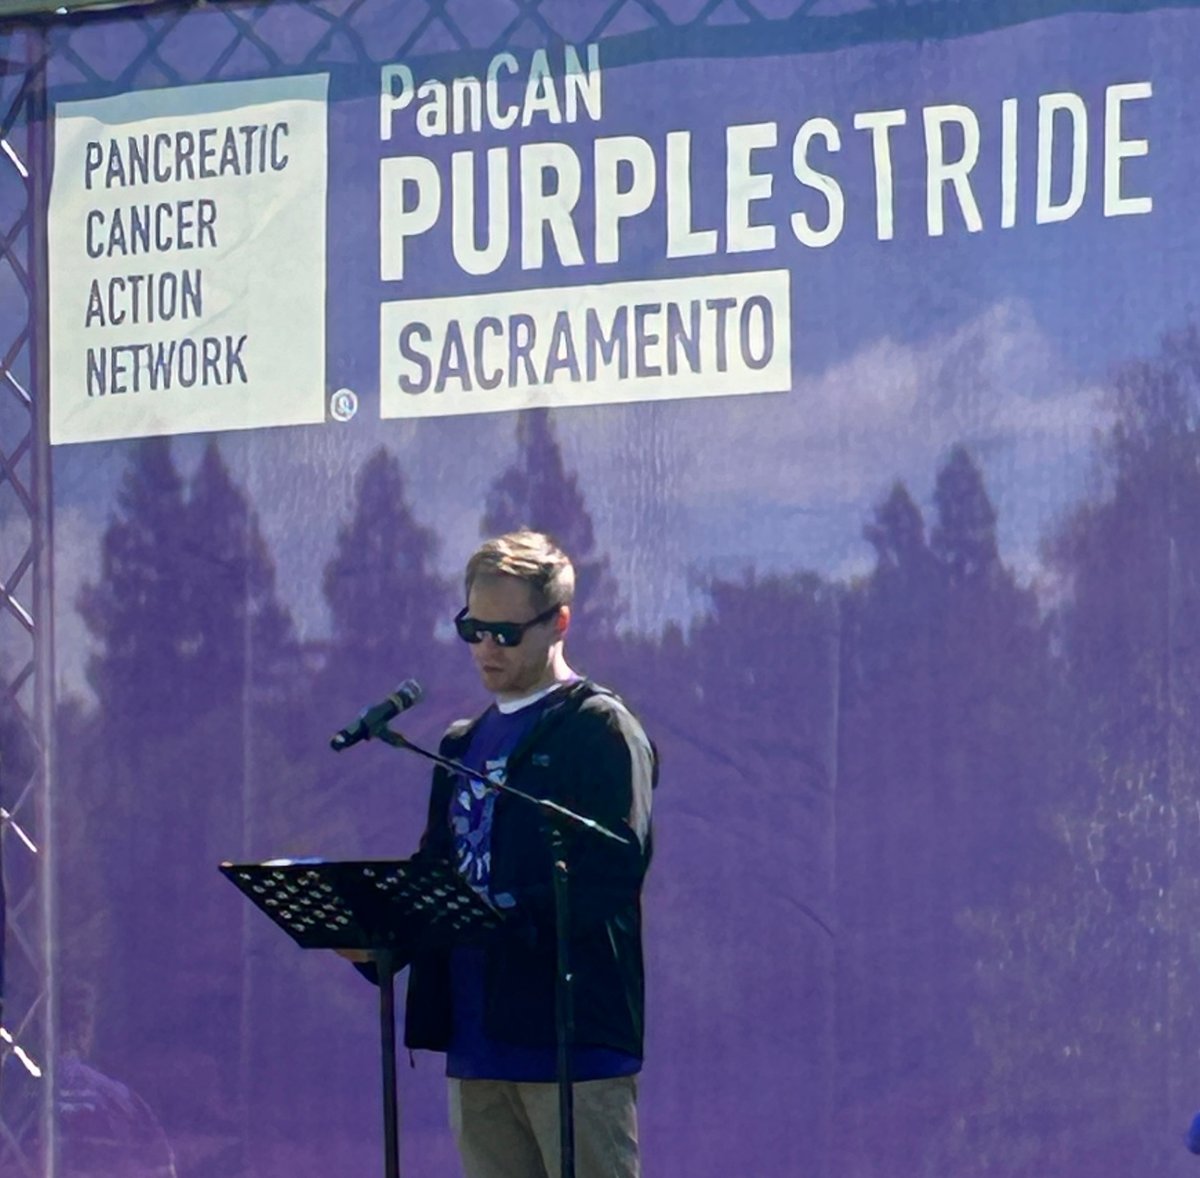 Last weekend @UCD_Cancer participated in @PanCAN #PurpleStride to raise awareness and funds to help end pancreatic cancer. The Cancer Center helped raise over $5k for vital research. See the story from @kcranews: ucdavis.health/3UrzcKc #pancreaticcancer